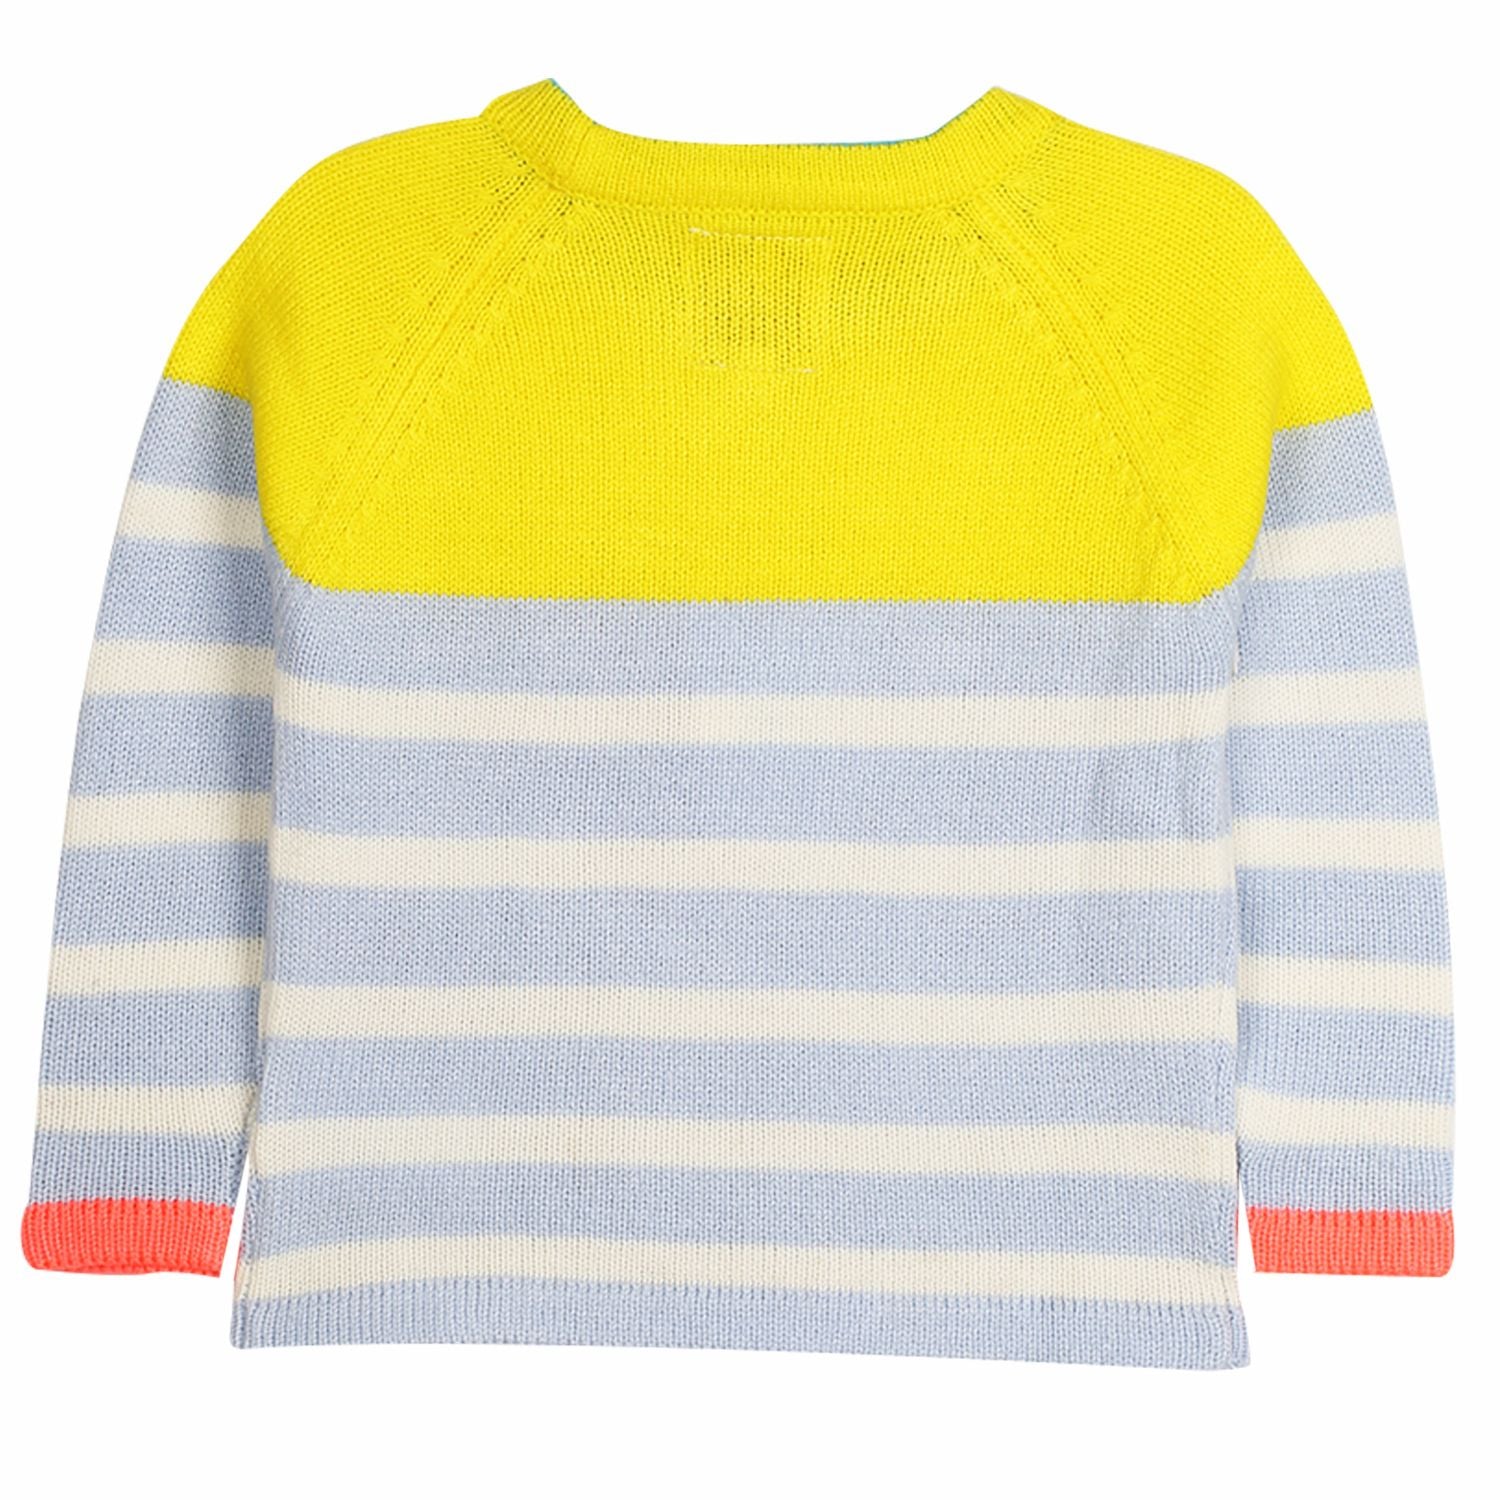 Girls Sweaters - Buy Sweaters for Girls Online | Cherry Crumble ...